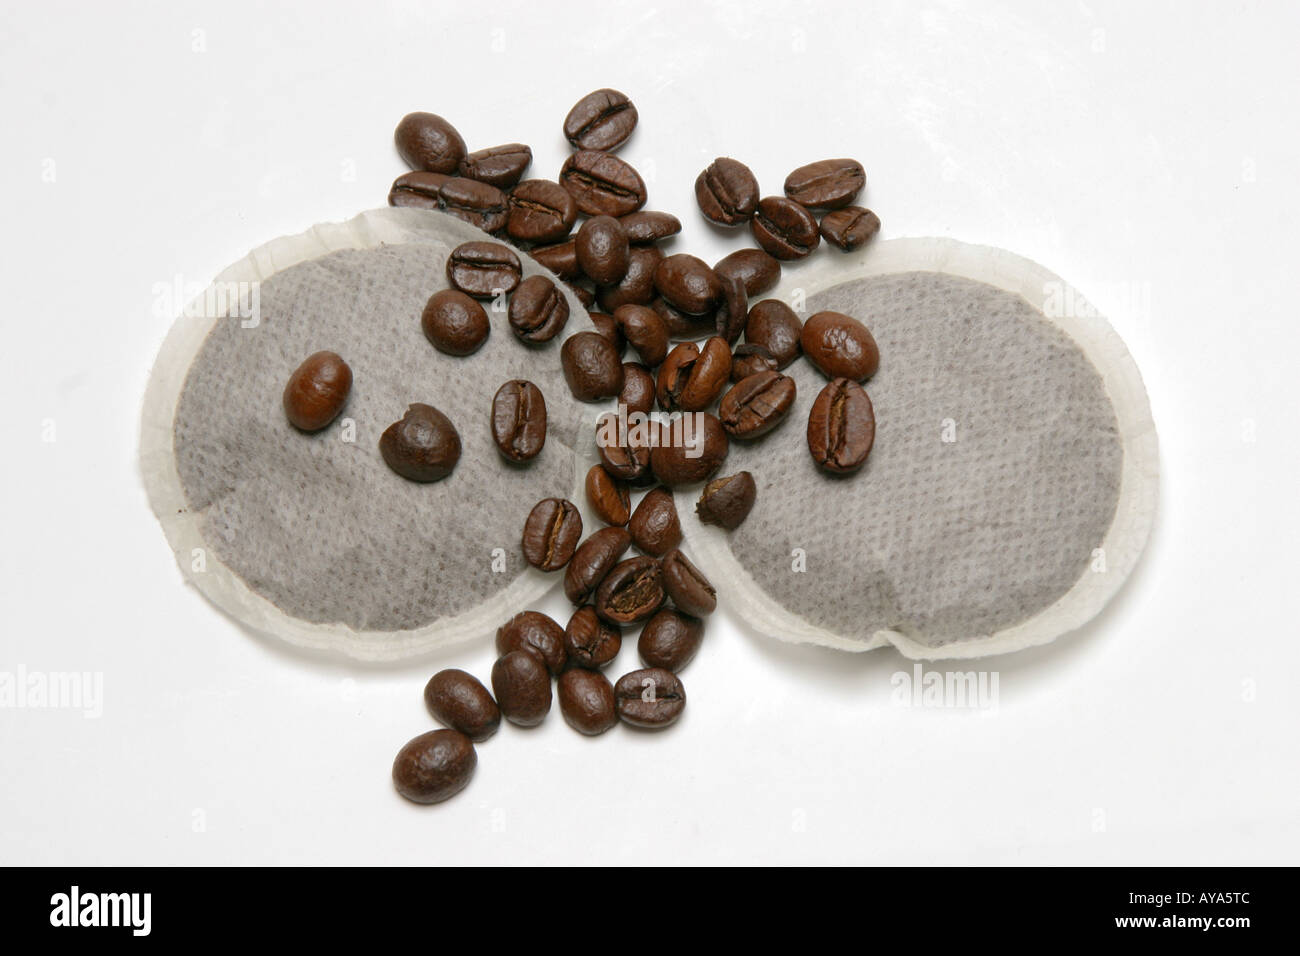 Coffe-beans and modern coffee-pads Stock Photo